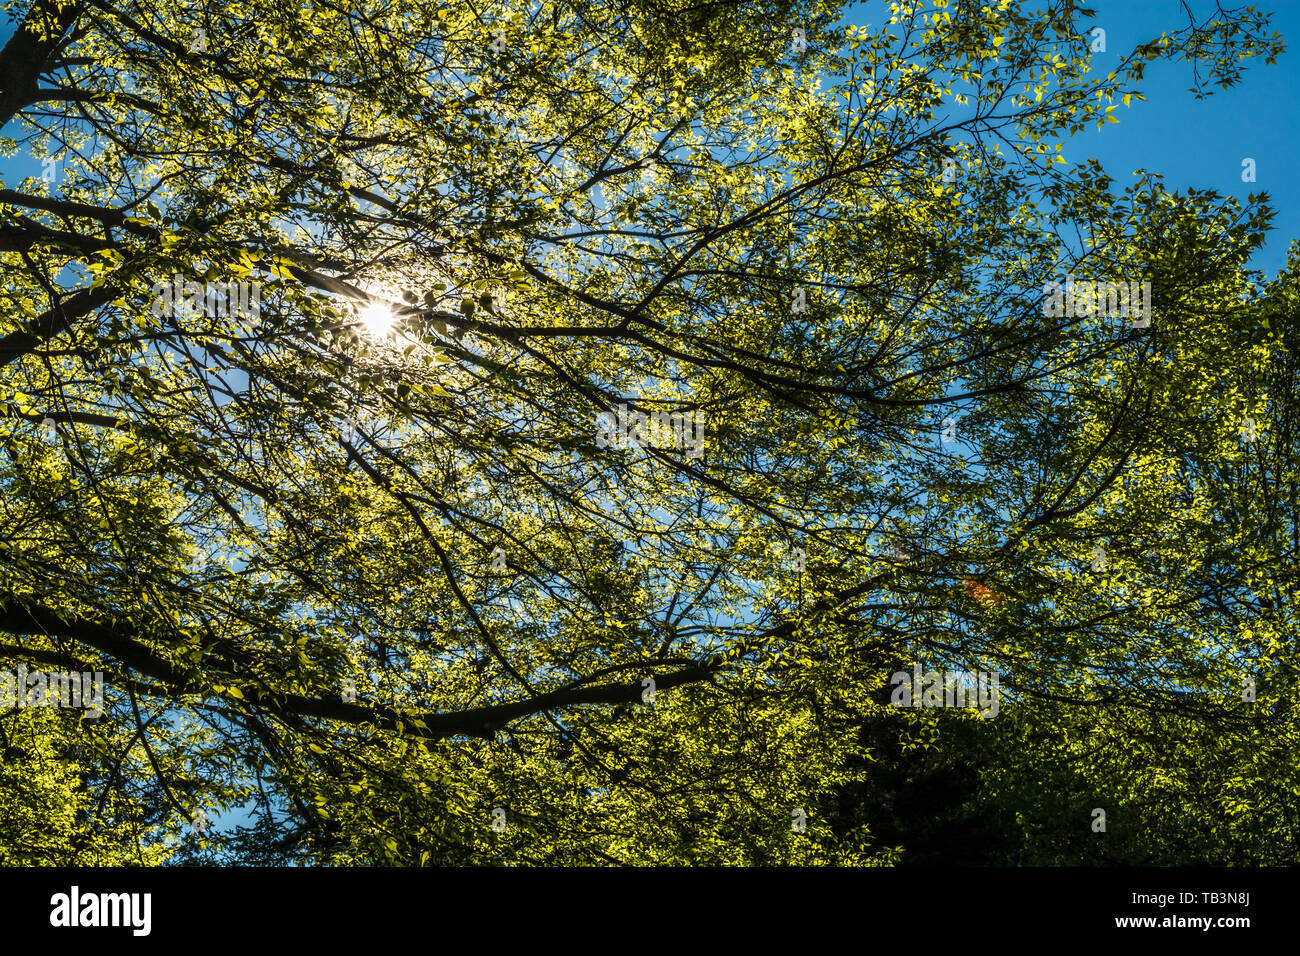 Sun shining though tree branches Stock Photo